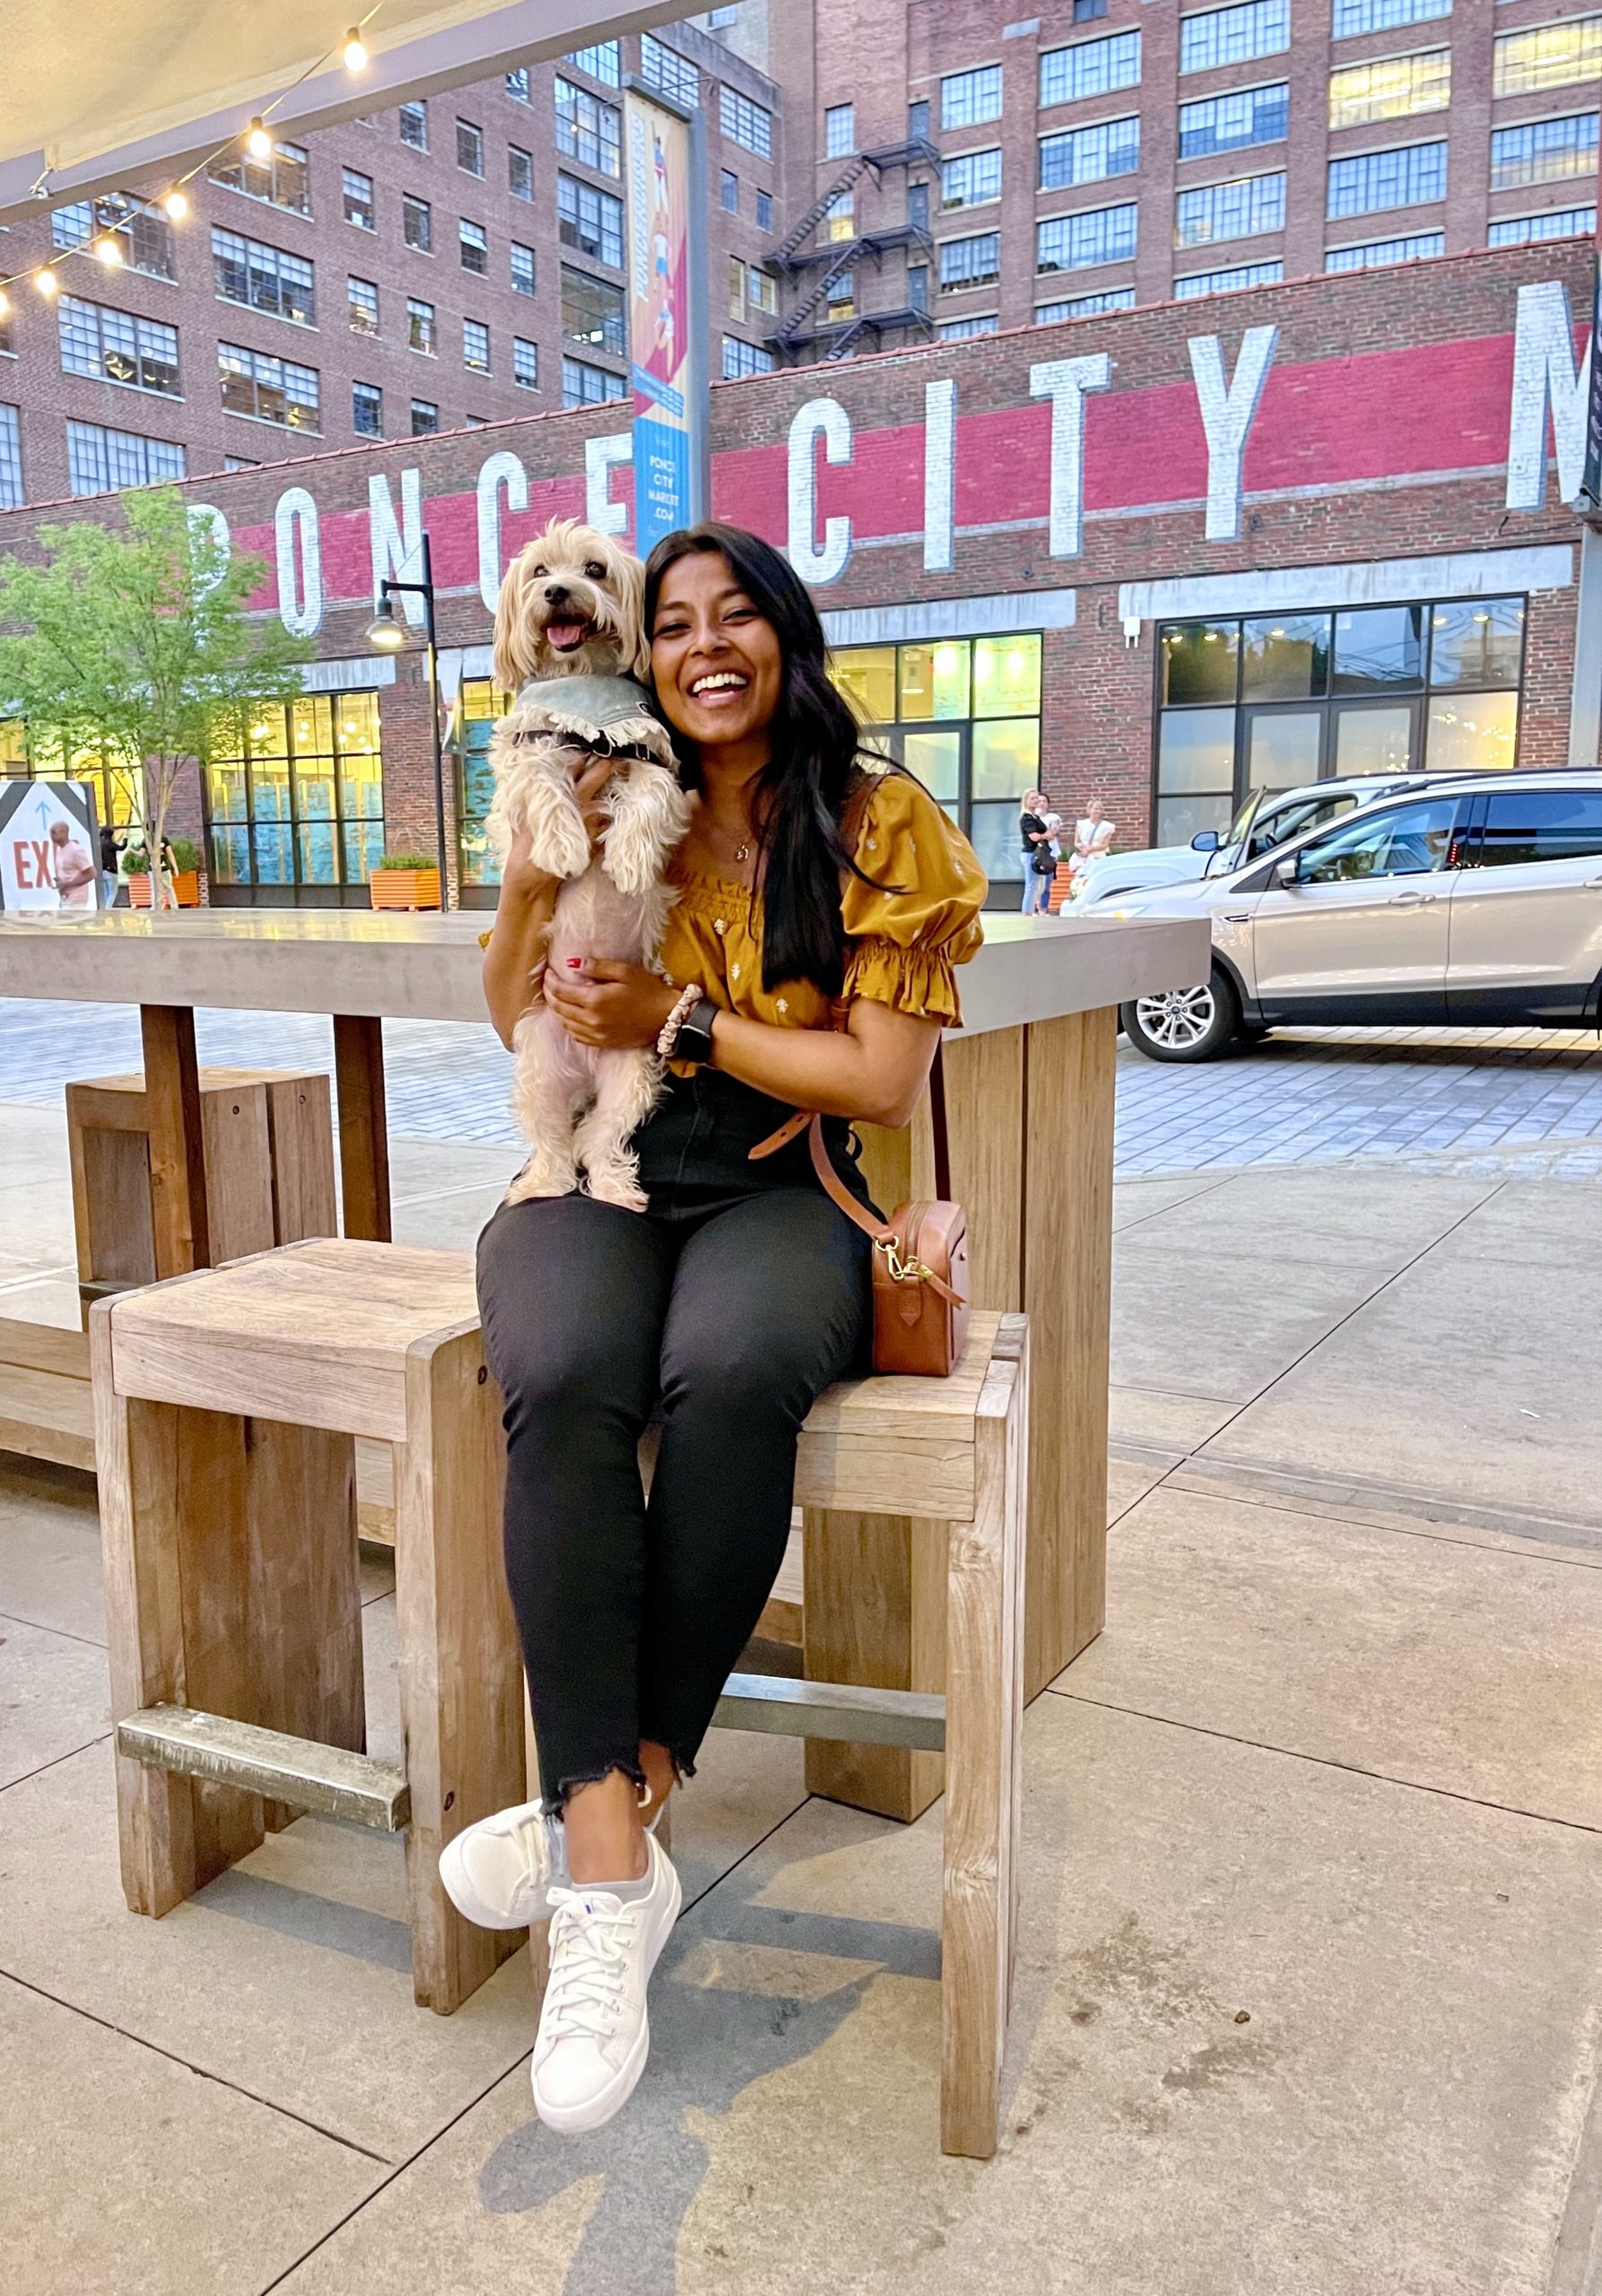 Sharon, a south east asian women has her small tan dog Teddy on her lap. They are sitting in front of a sign that says ponce city market.